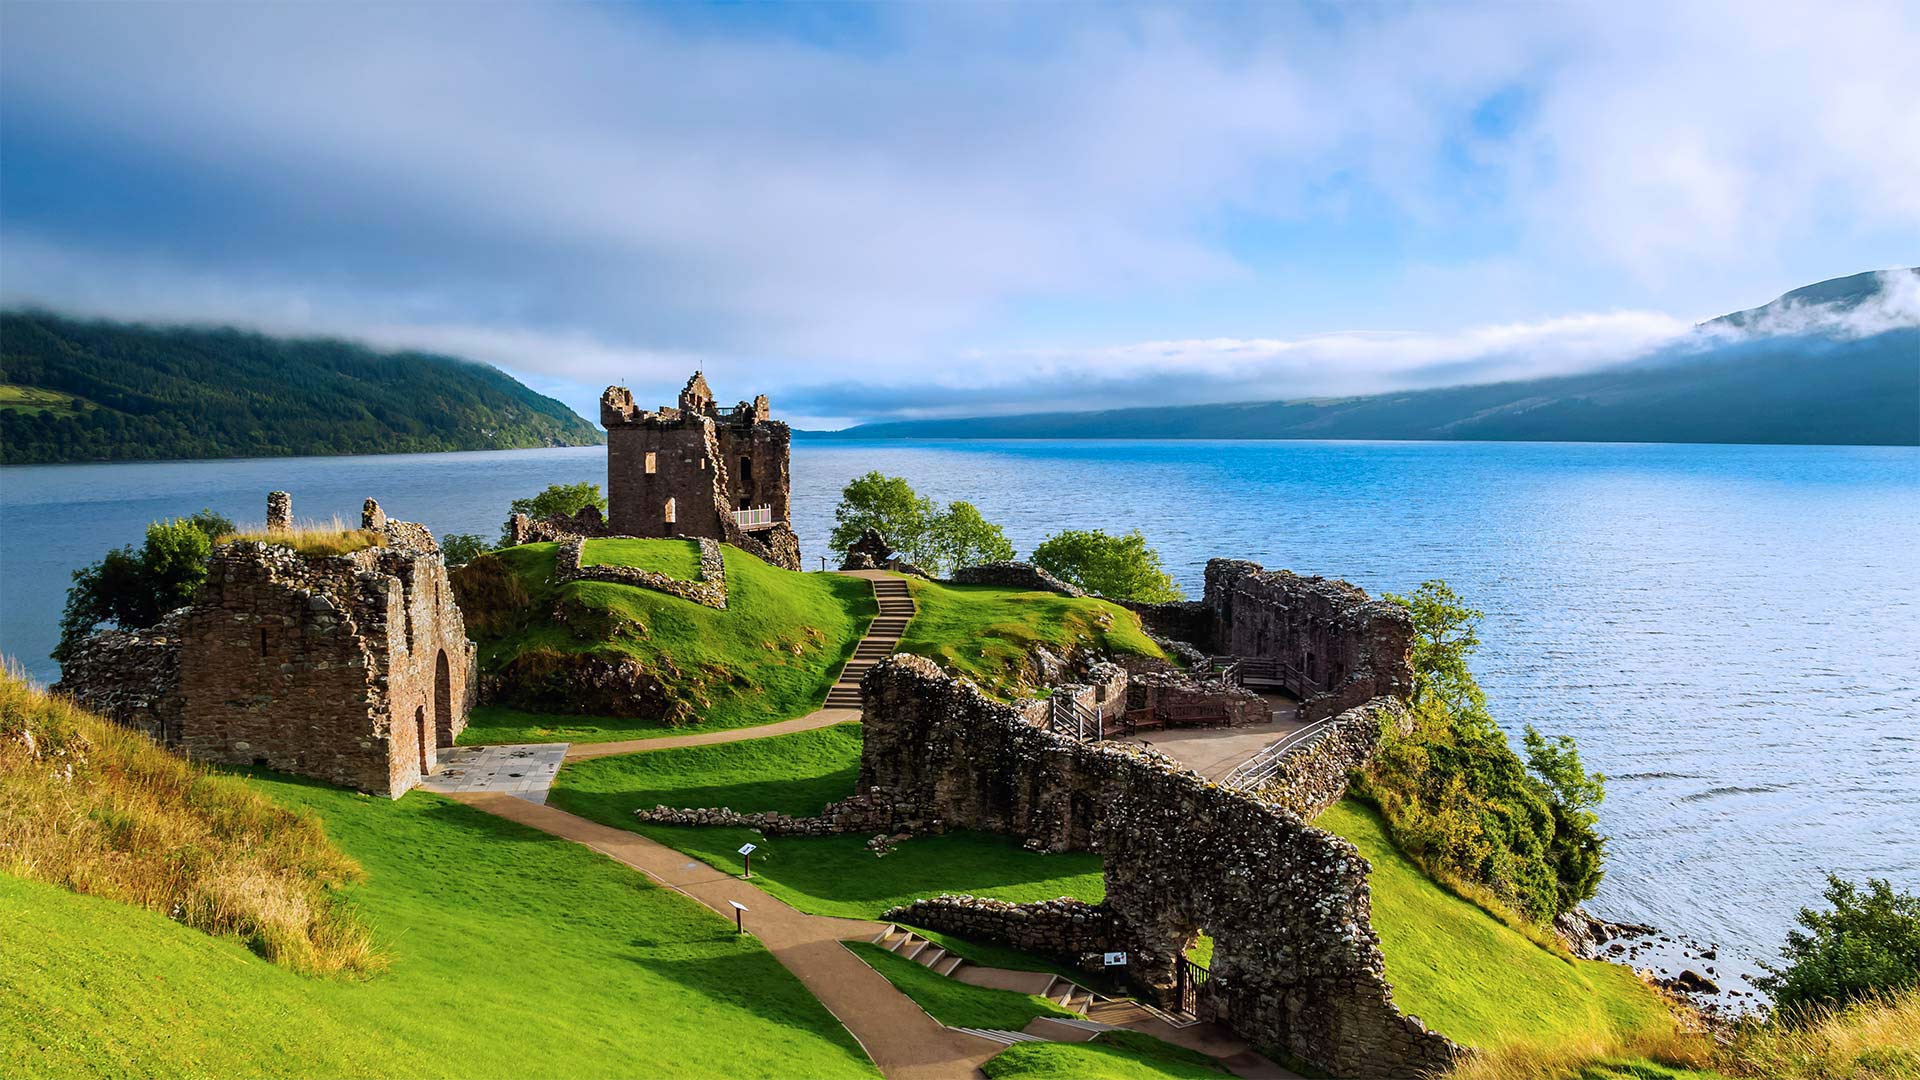 Urquhart Castle and Loch Ness in the Scottish Highlands - AWL Images/Danita Delimont)